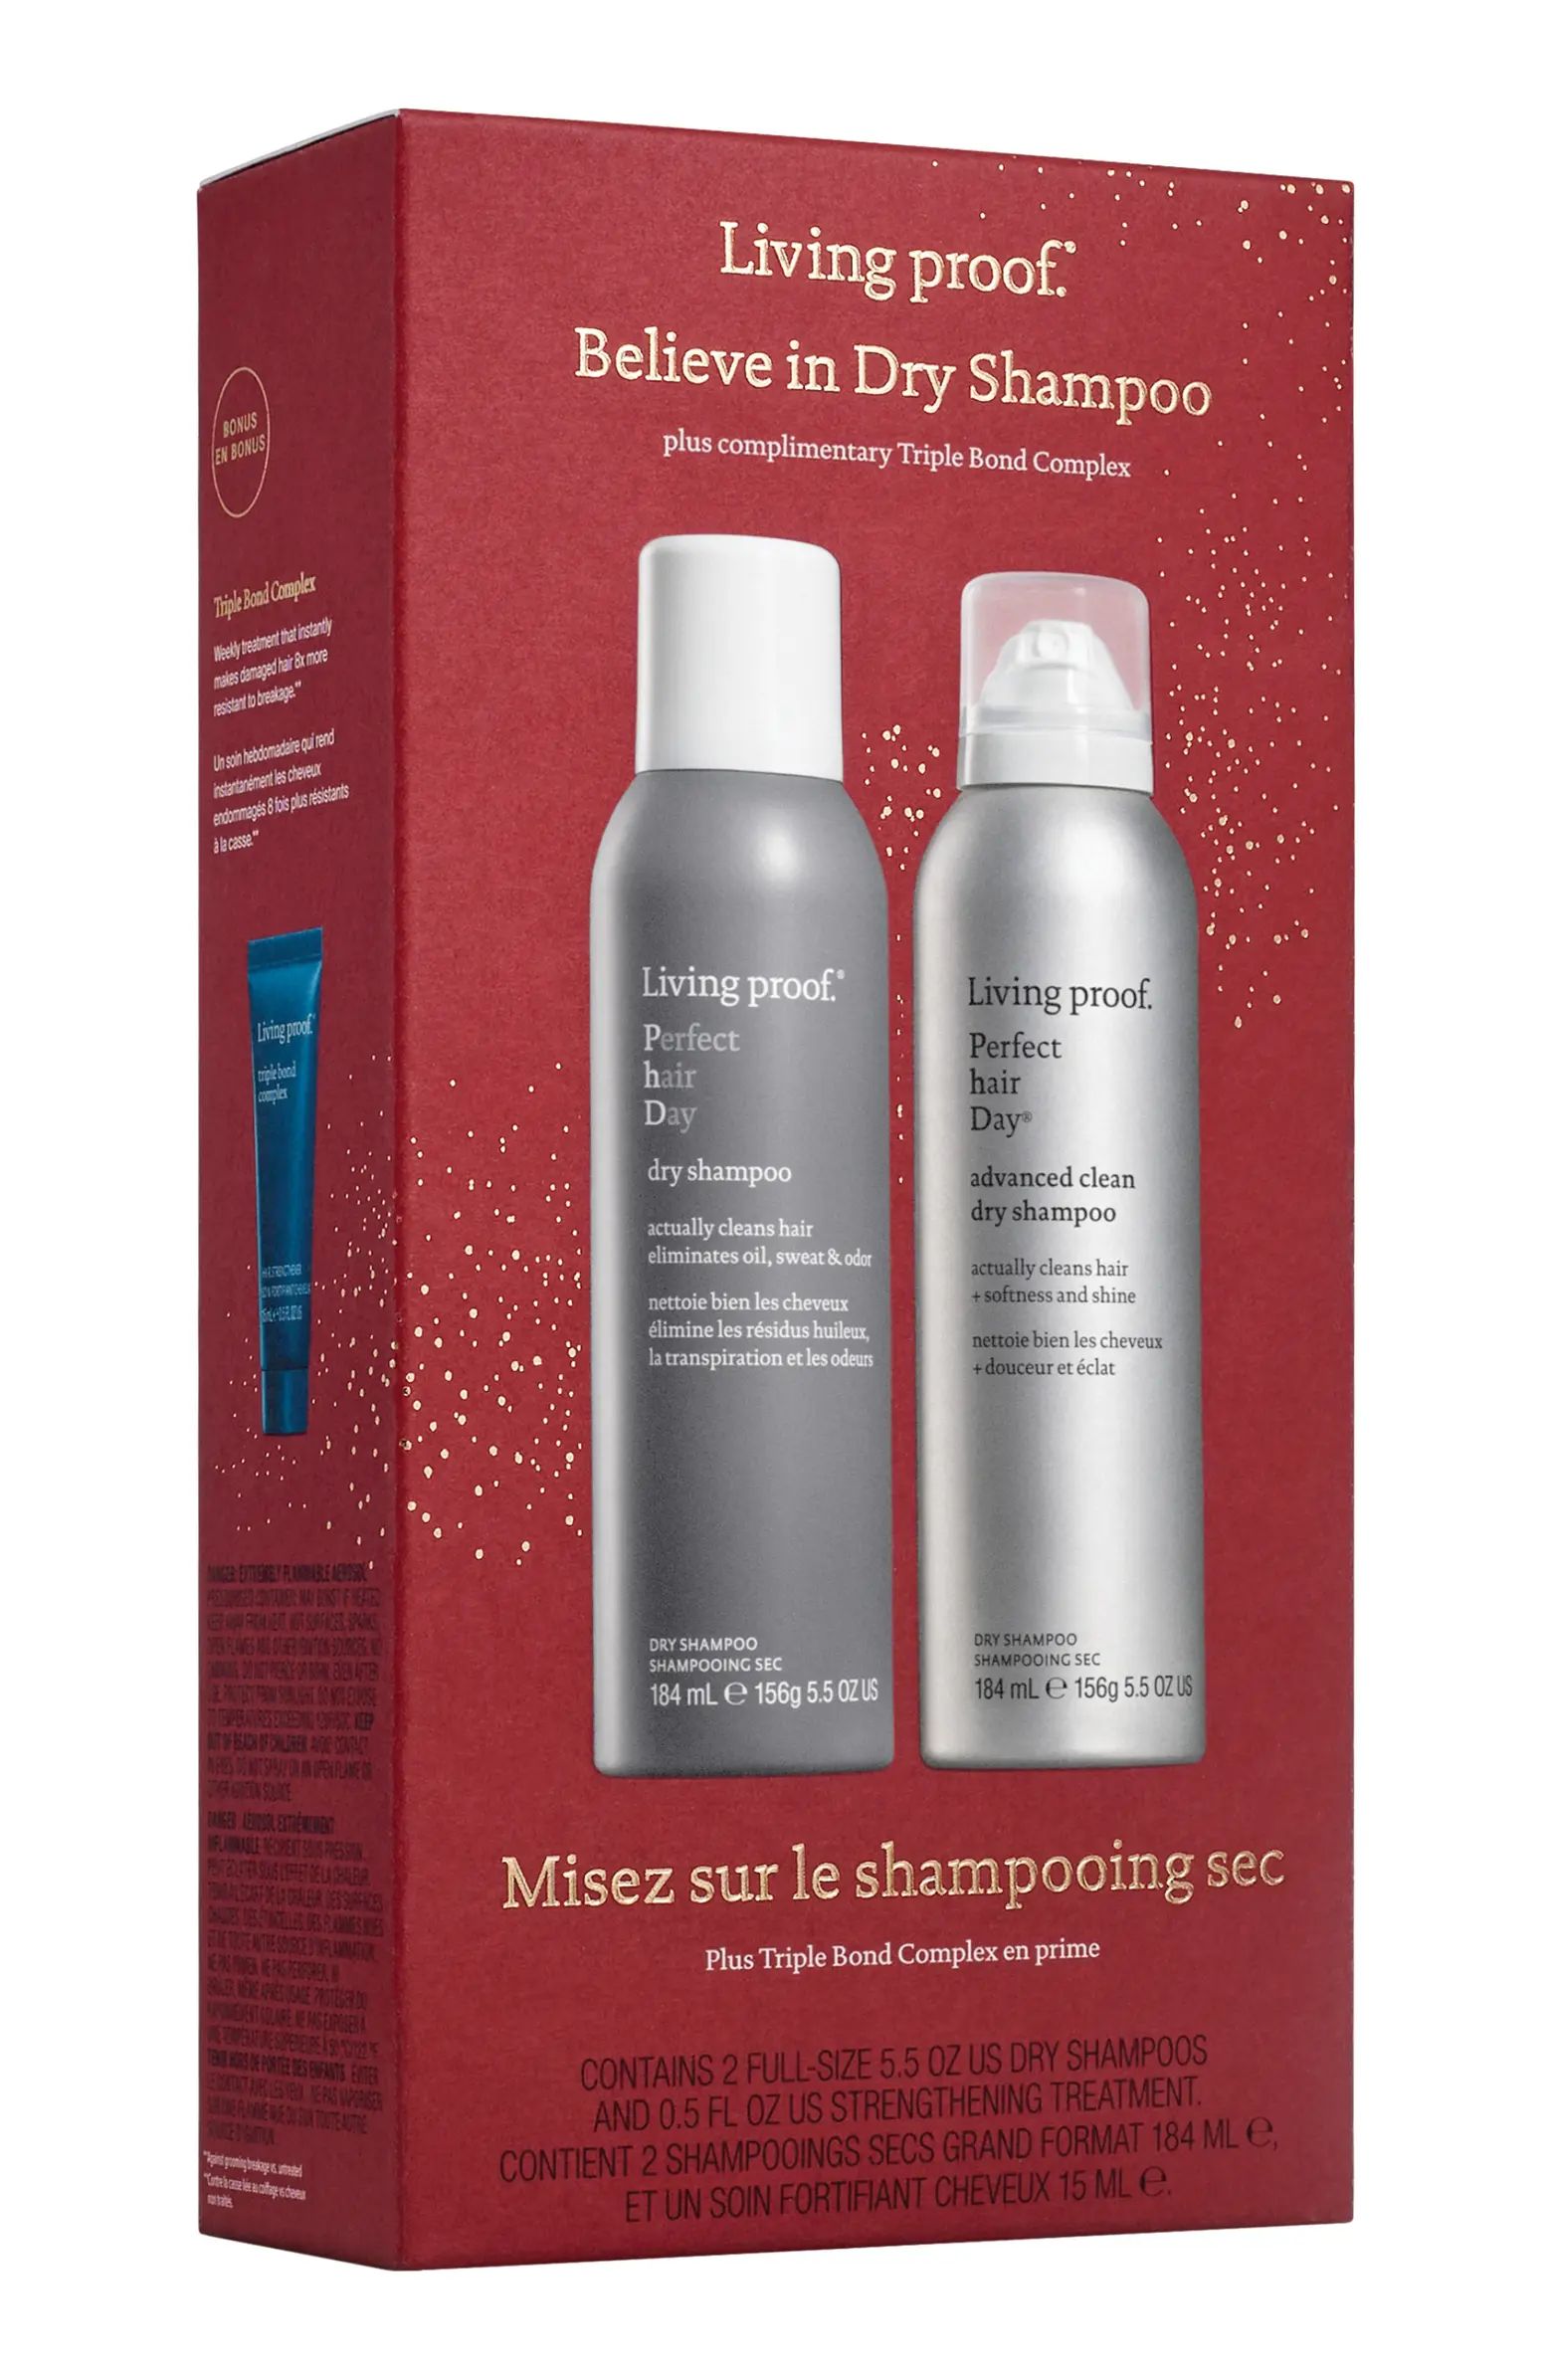 Believe in Dry Shampoo Set (Limited Edition) $83 Value | Nordstrom